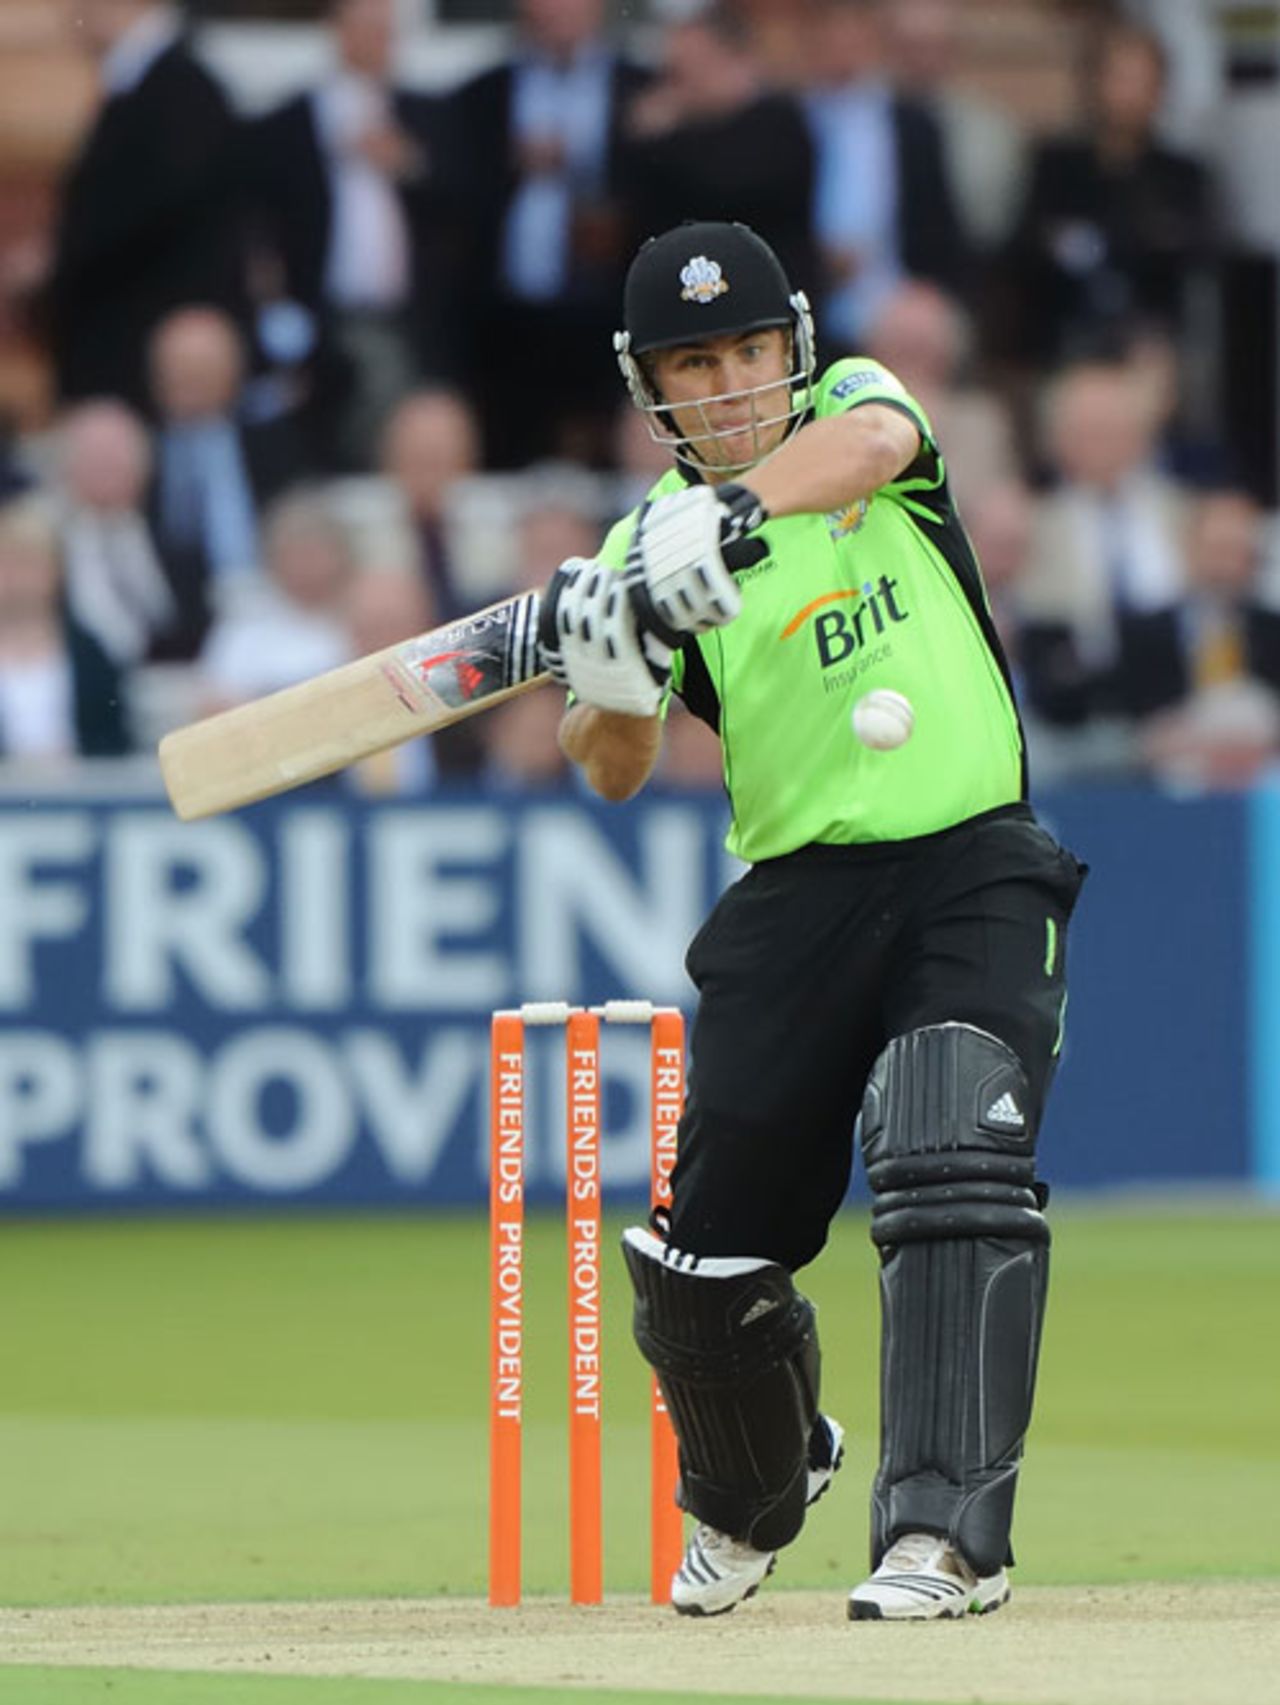 Rory Hamilton-Brown hit an assured 49-ball unbeaten 73 to guide Surrey to a comfortable victory, Middlesex v Surrey, Friends Provident t20, Lord's